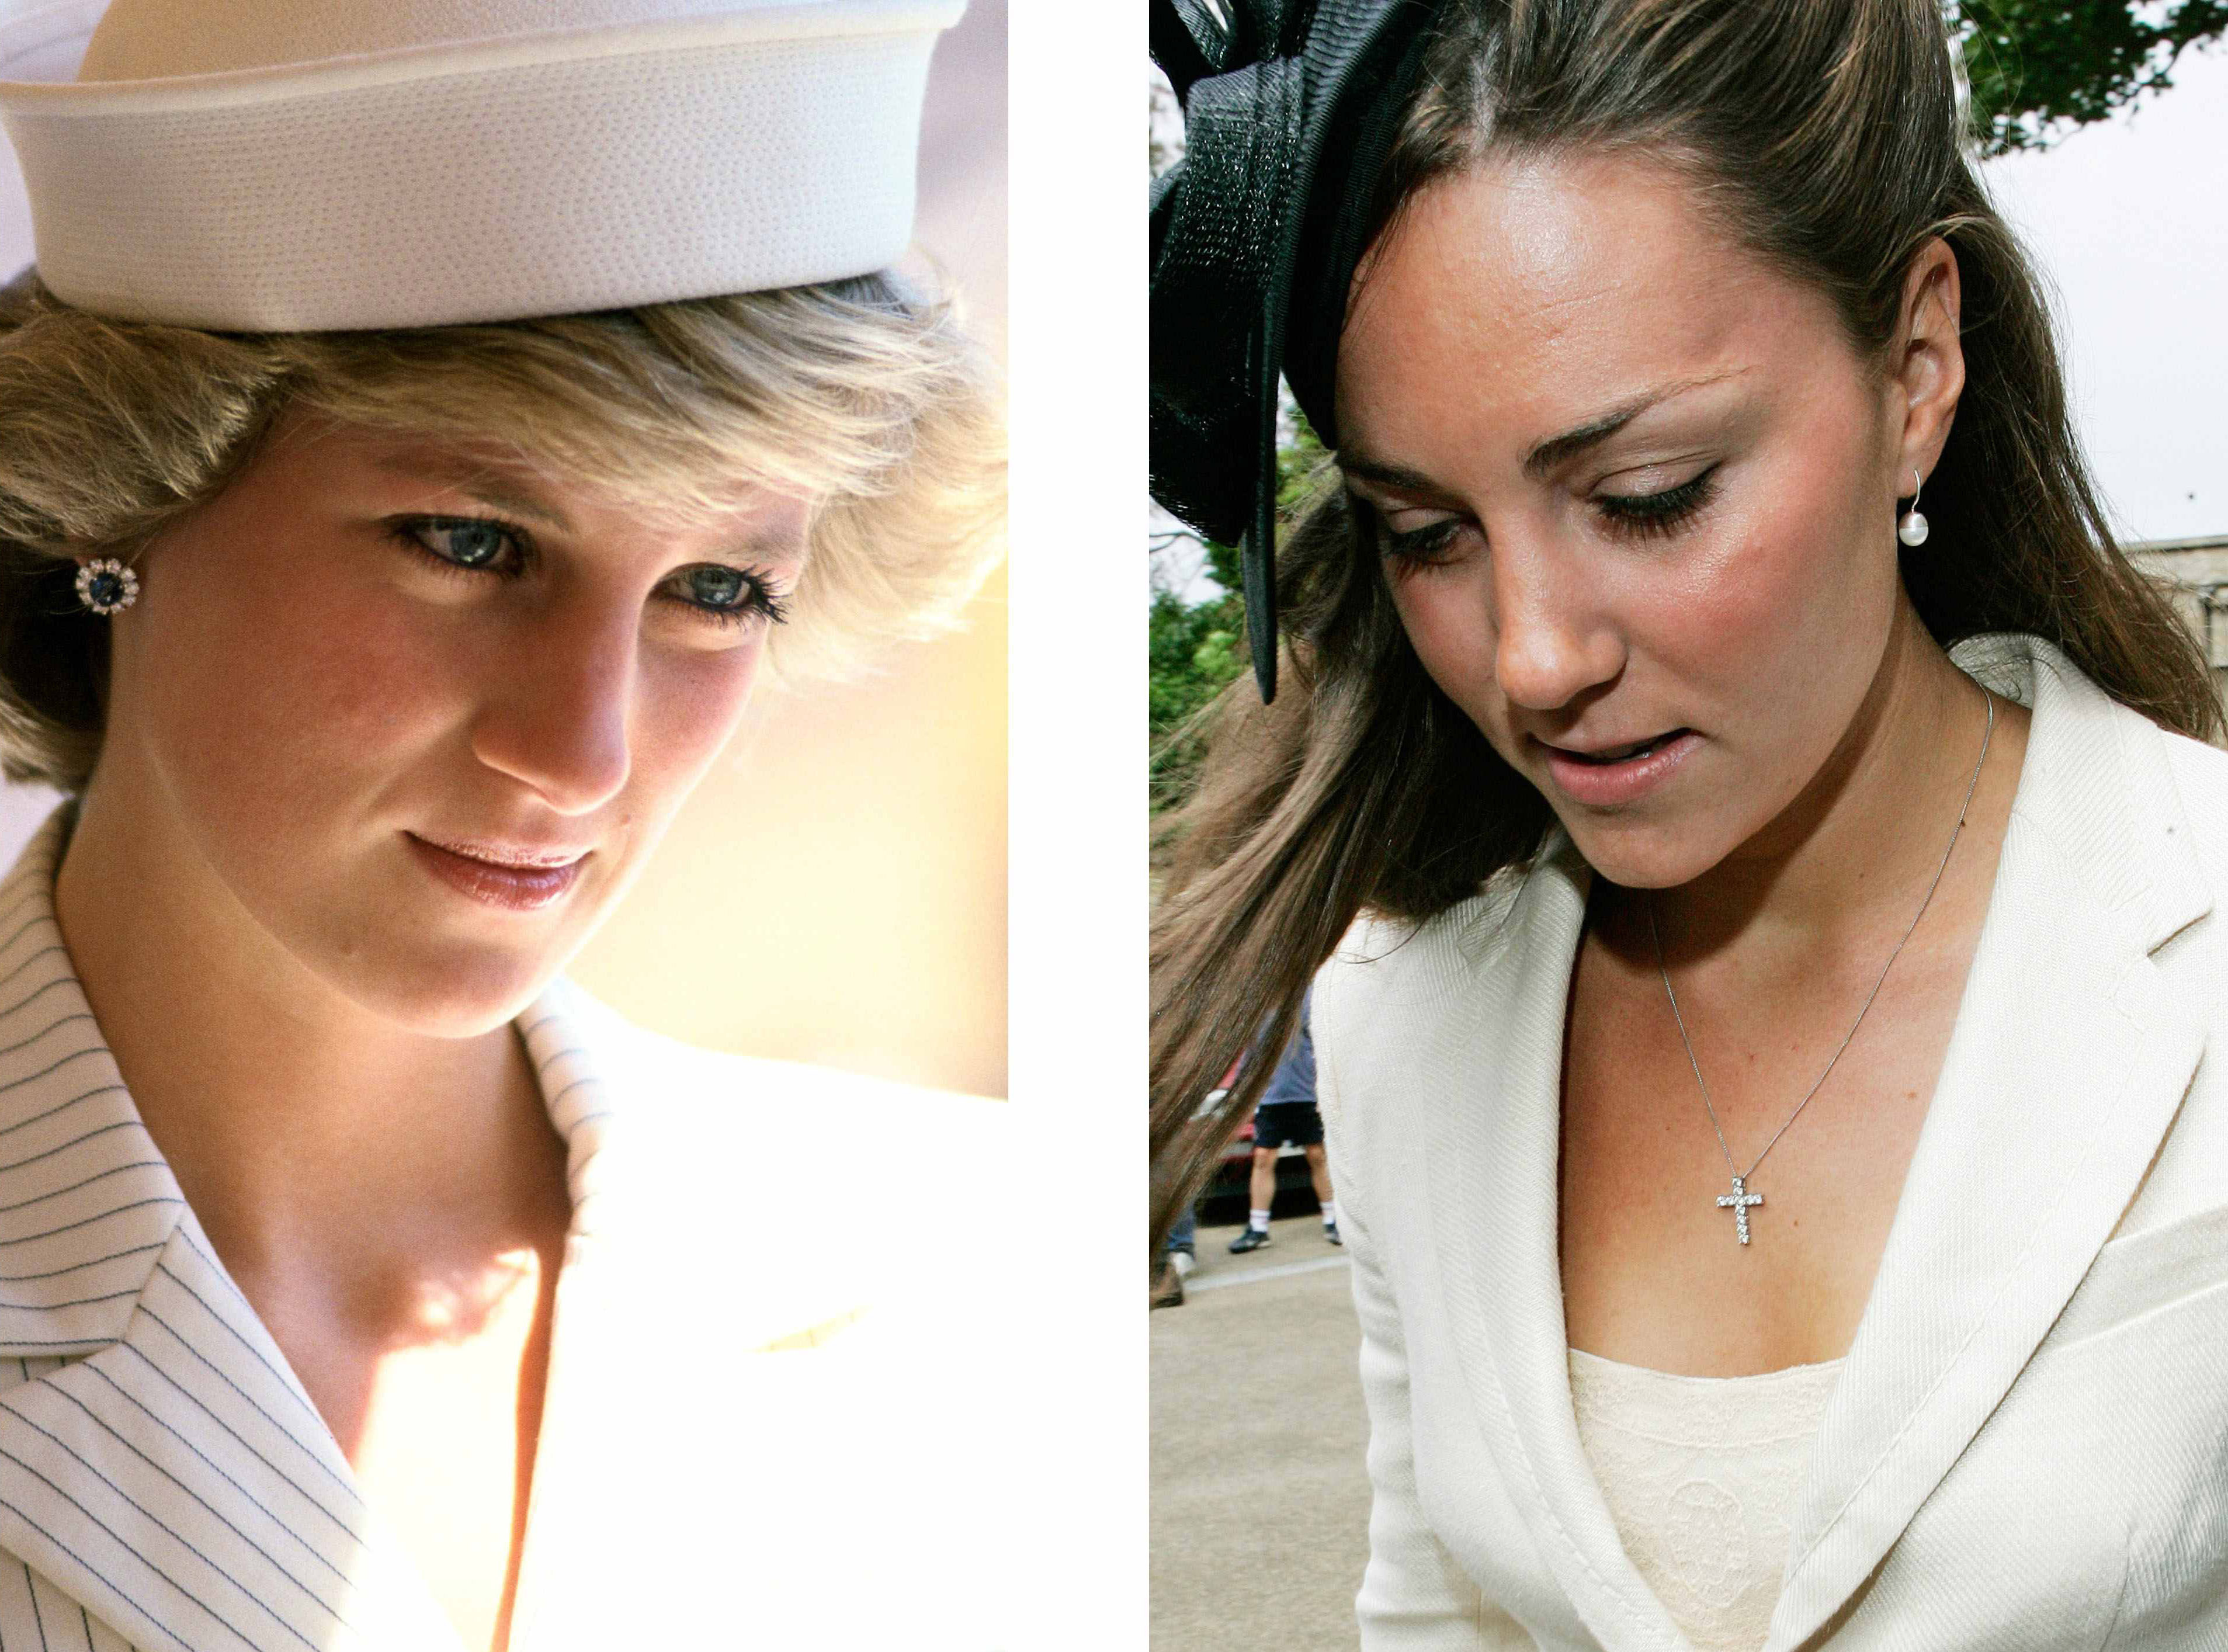 (L) Photo of Princess Diana during a tour of Italy, (R) Kate Middleton attending the wedding of Hugh Van Cutsem Jr. and Rose Astor